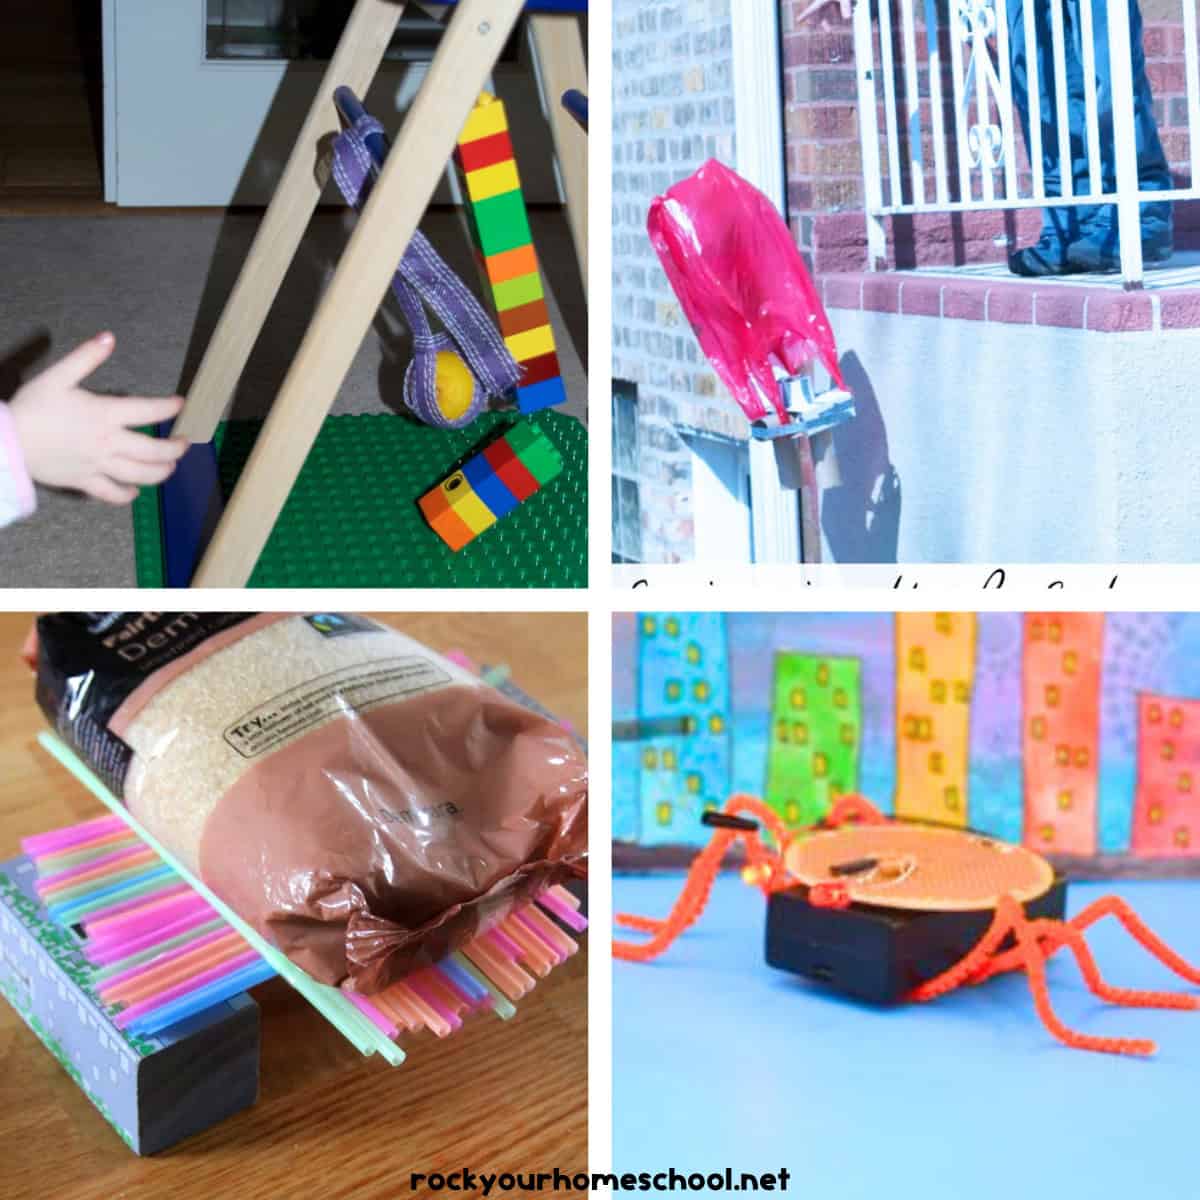 Engineering Activities for Kids: 20 Fun & Engaging Ideas